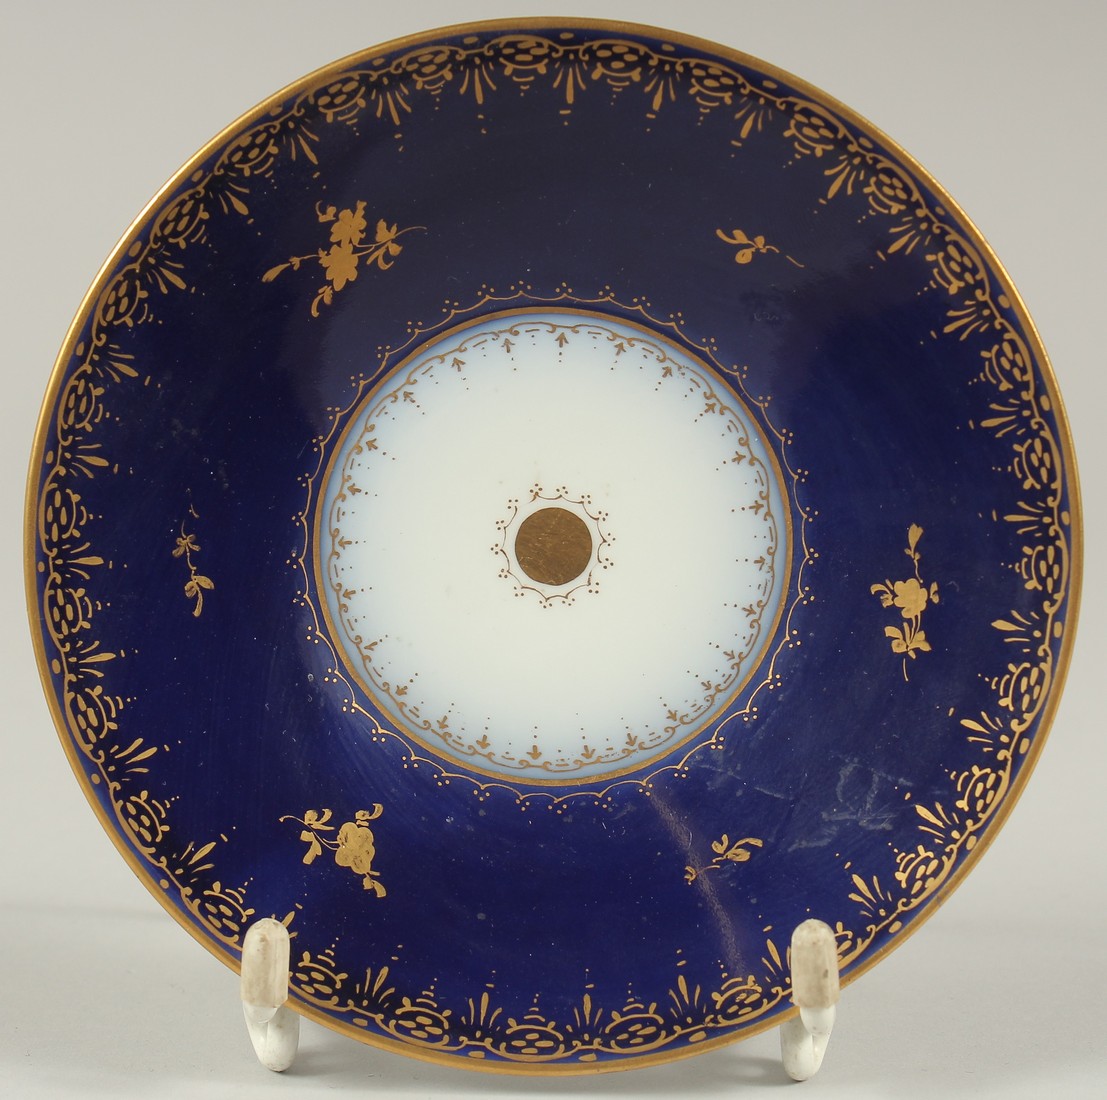 A GOOD DRESDEN CUP AND SAUCER with blue ground, painted with an oval of a lady carrying a tray. - Image 3 of 9